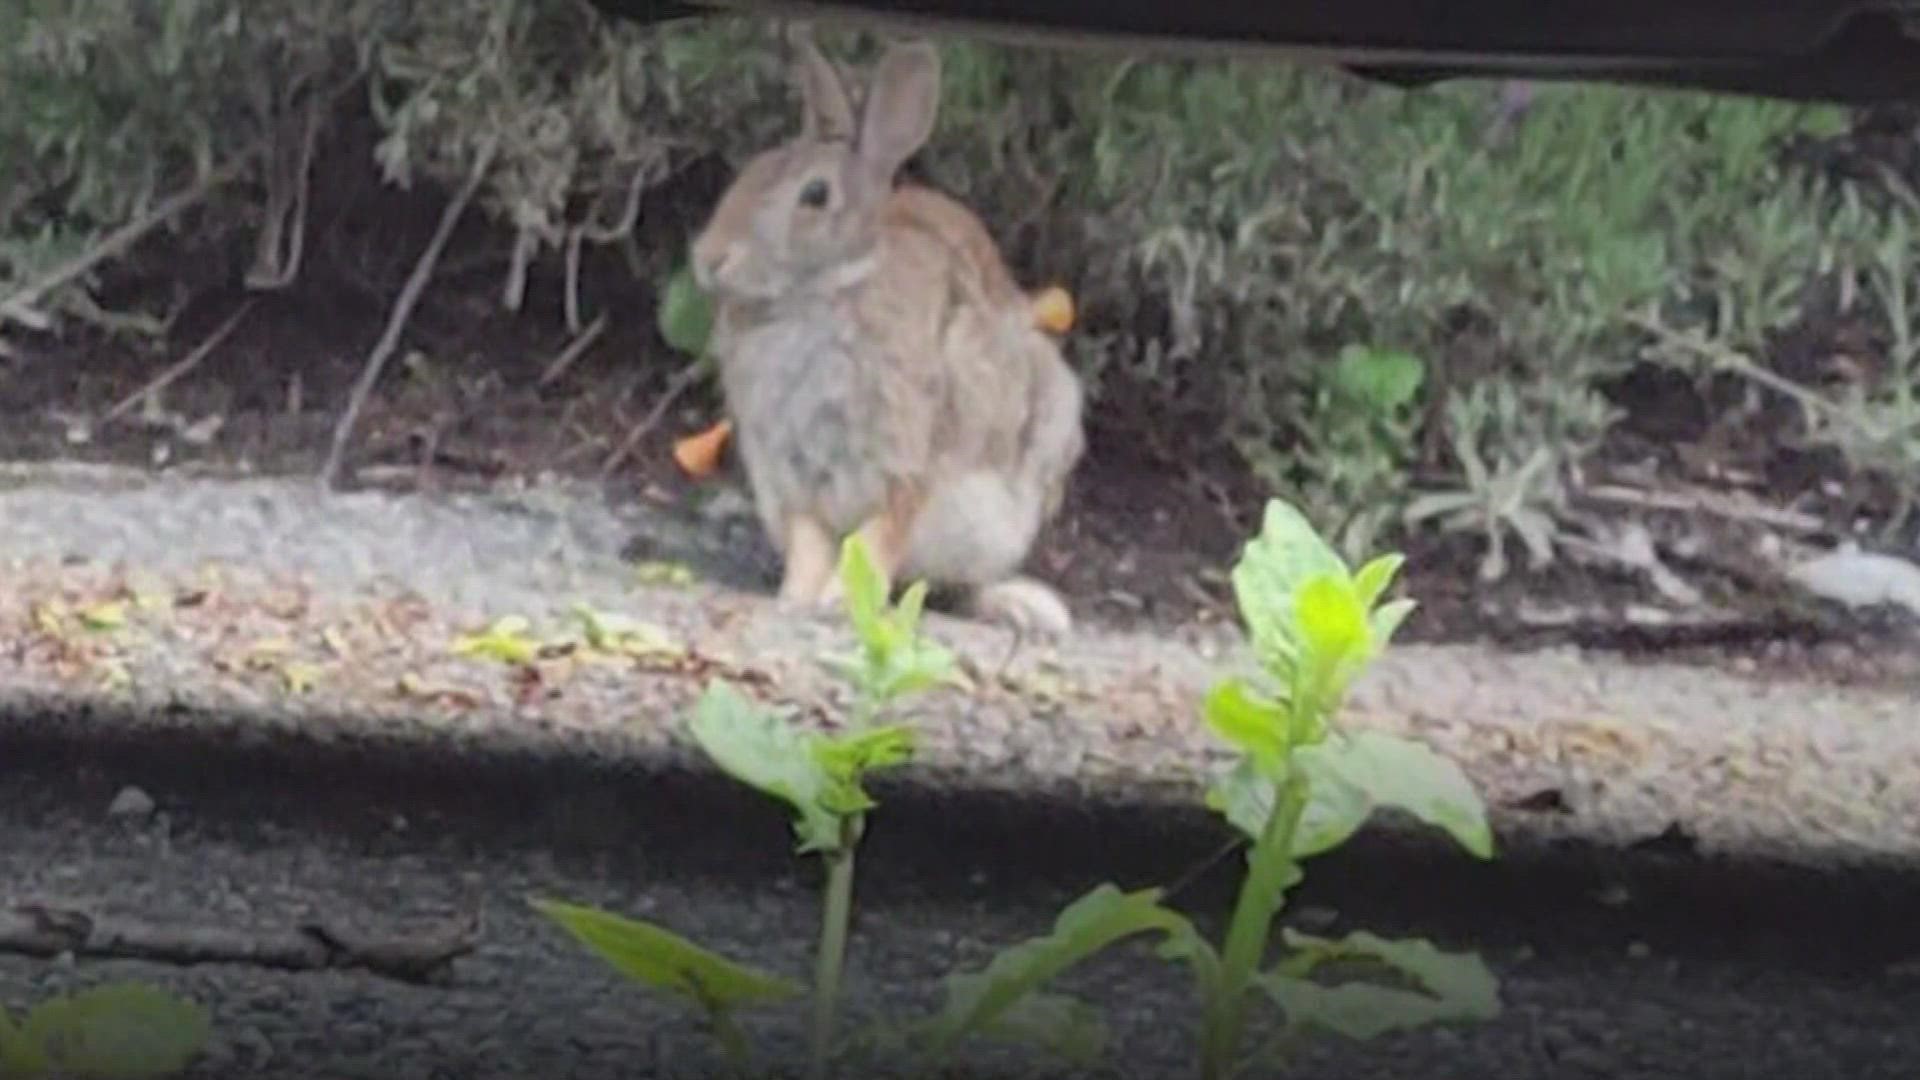 It's becoming a disturbing trend in a Sammamish neighborhood. Neighbors found blow darts in wild rabbits. Some of them are still alive while others were killed.